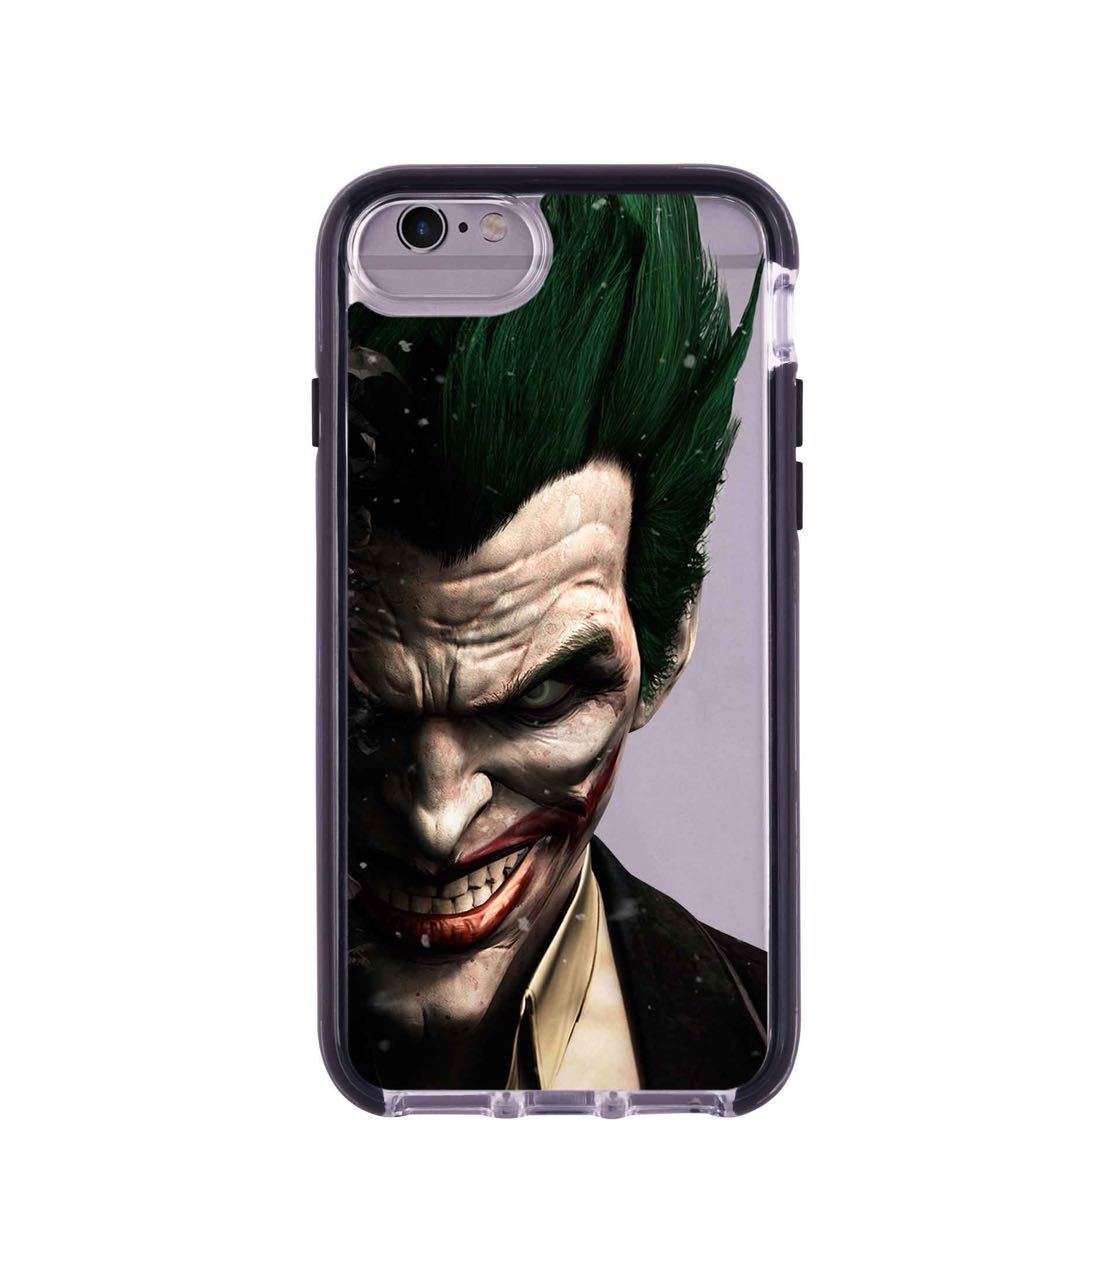 Joker Withers - Extreme Phone Case for iPhone 6S Plus